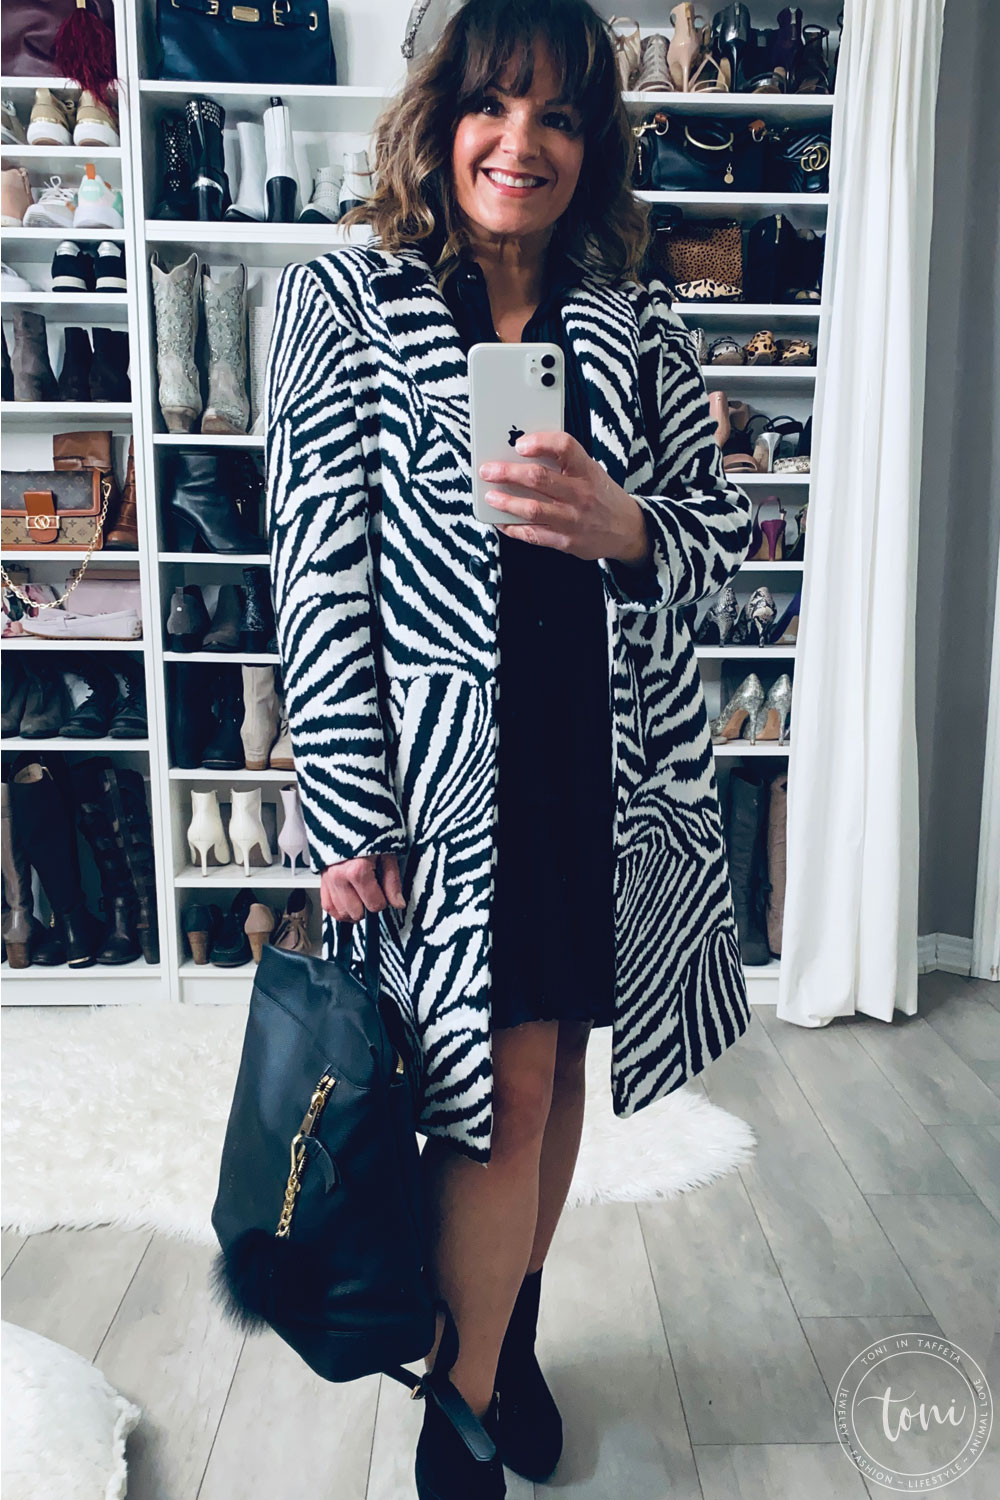 Kate Spade Ruffled Dress and Ankle Booties and Animal Print Coat